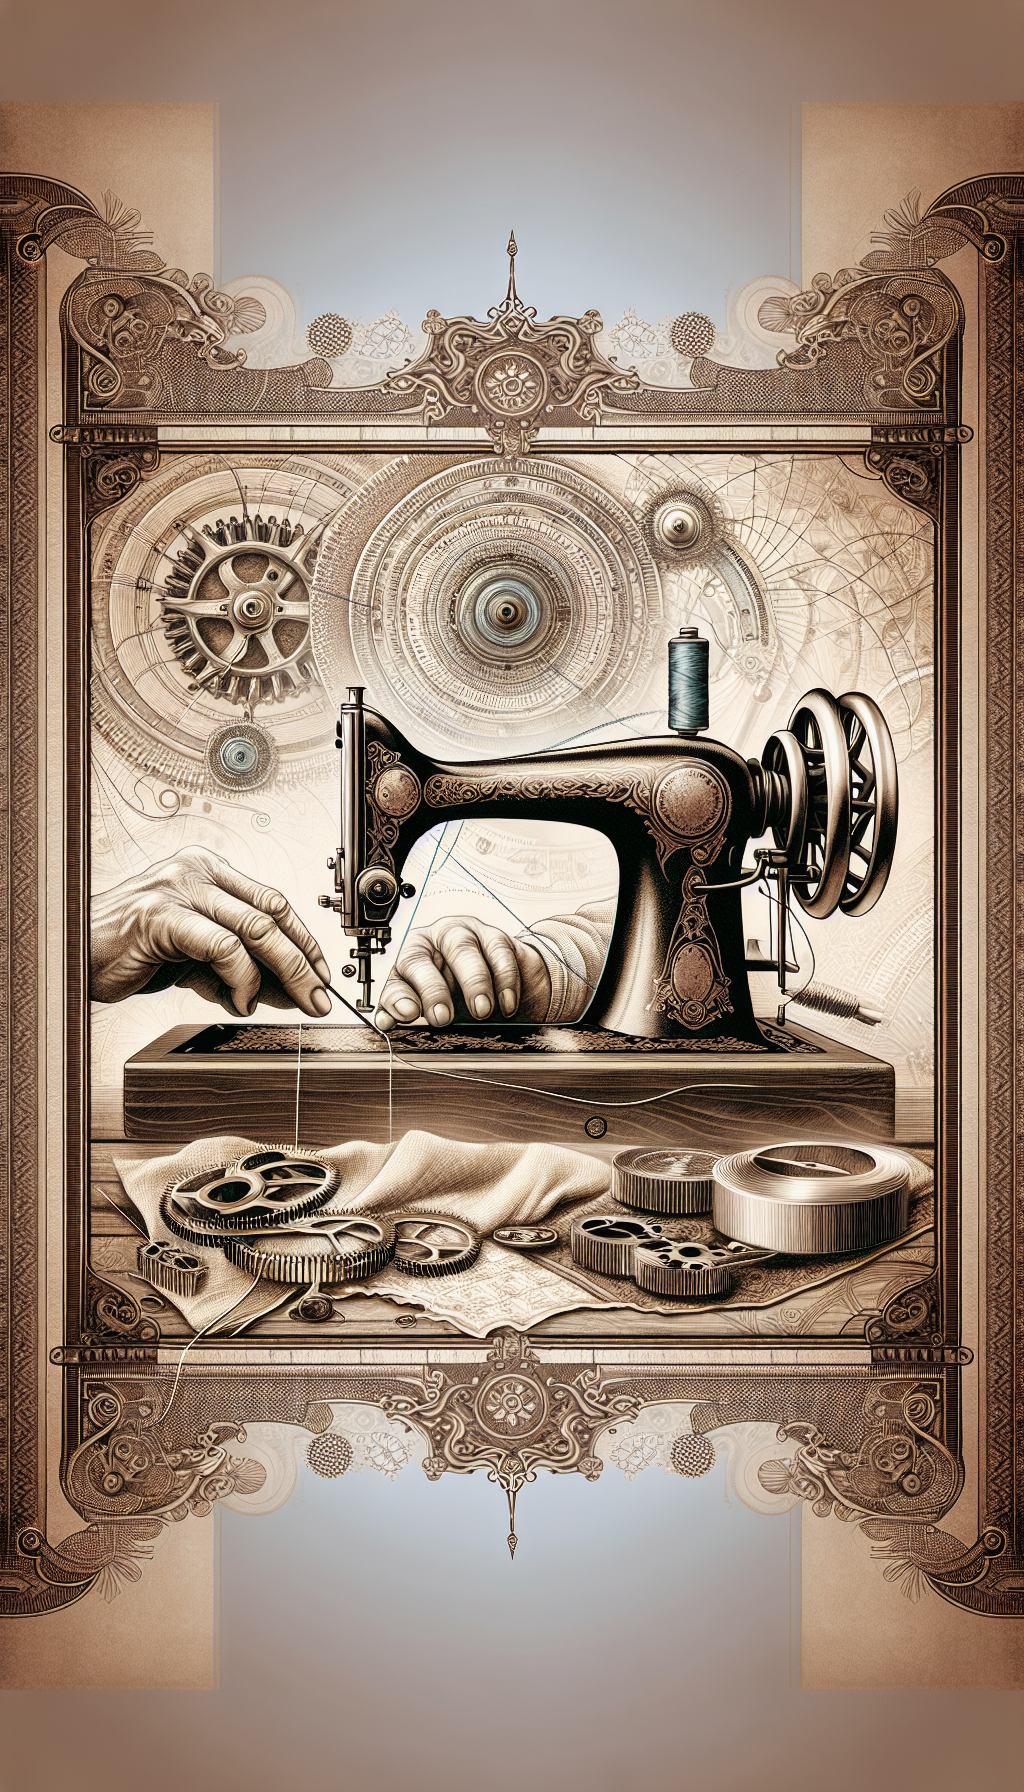 An intricately detailed illustration showcases a pair of aged, yet gentle hands delicately restoring an ornate antique sewing machine, with vintage-style motifs and interwoven thread patterns framing the scene. A soft sepia overtone envelops the machine, evoking a sense of history and value, while faint, transparent cogs and gears overlay the background, symbolizing the ongoing maintenance of tradition.